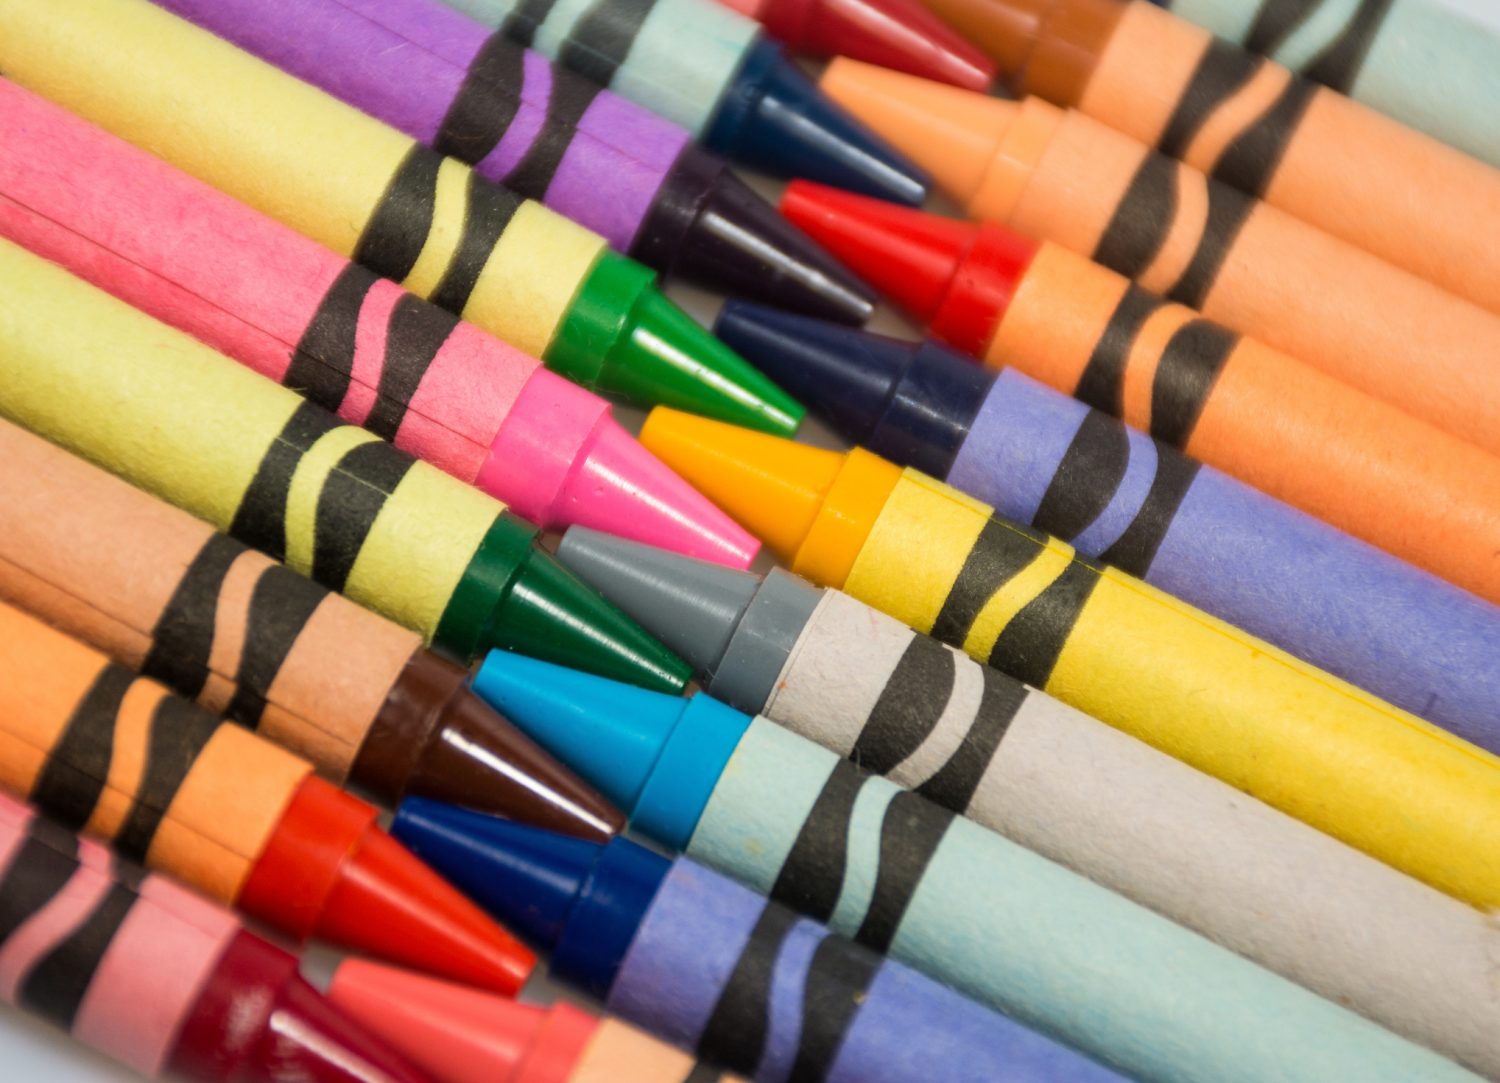 Plan the Best Trip to the Crayola Experience